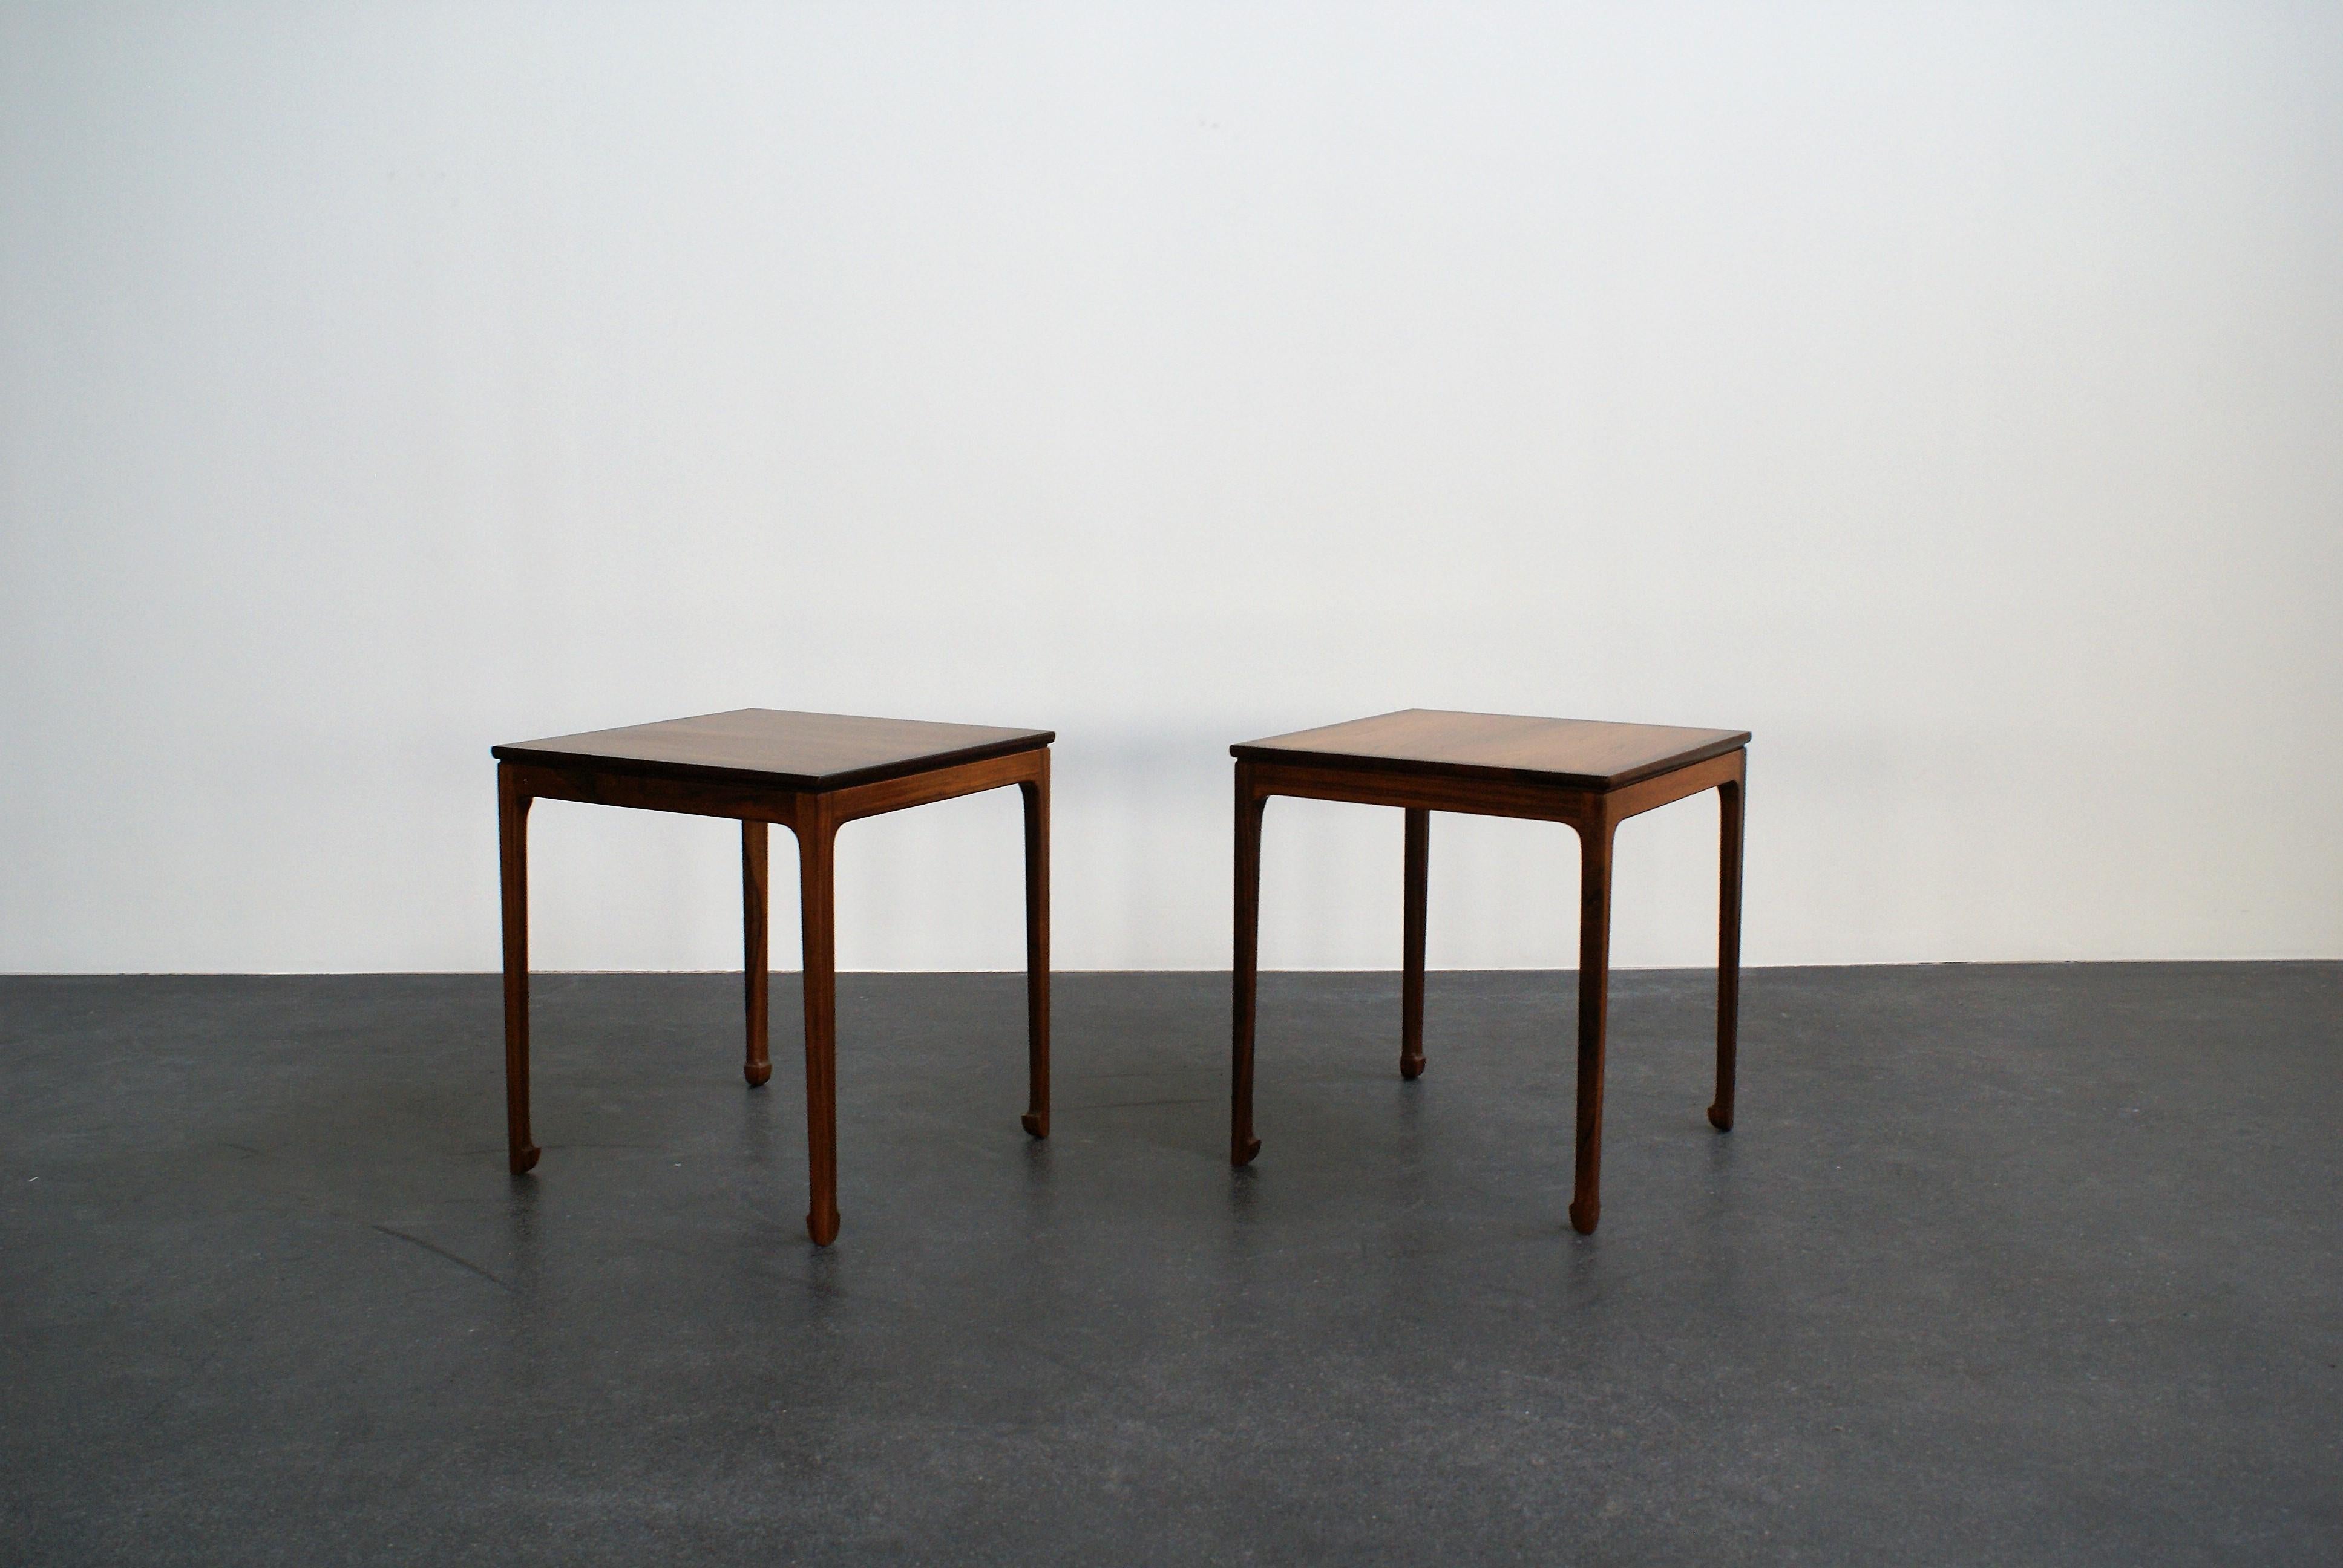 Ole Wanscher Pair of Side Tables in Brazilian Rosewood for A. J. Iversen, 1957 For Sale 6